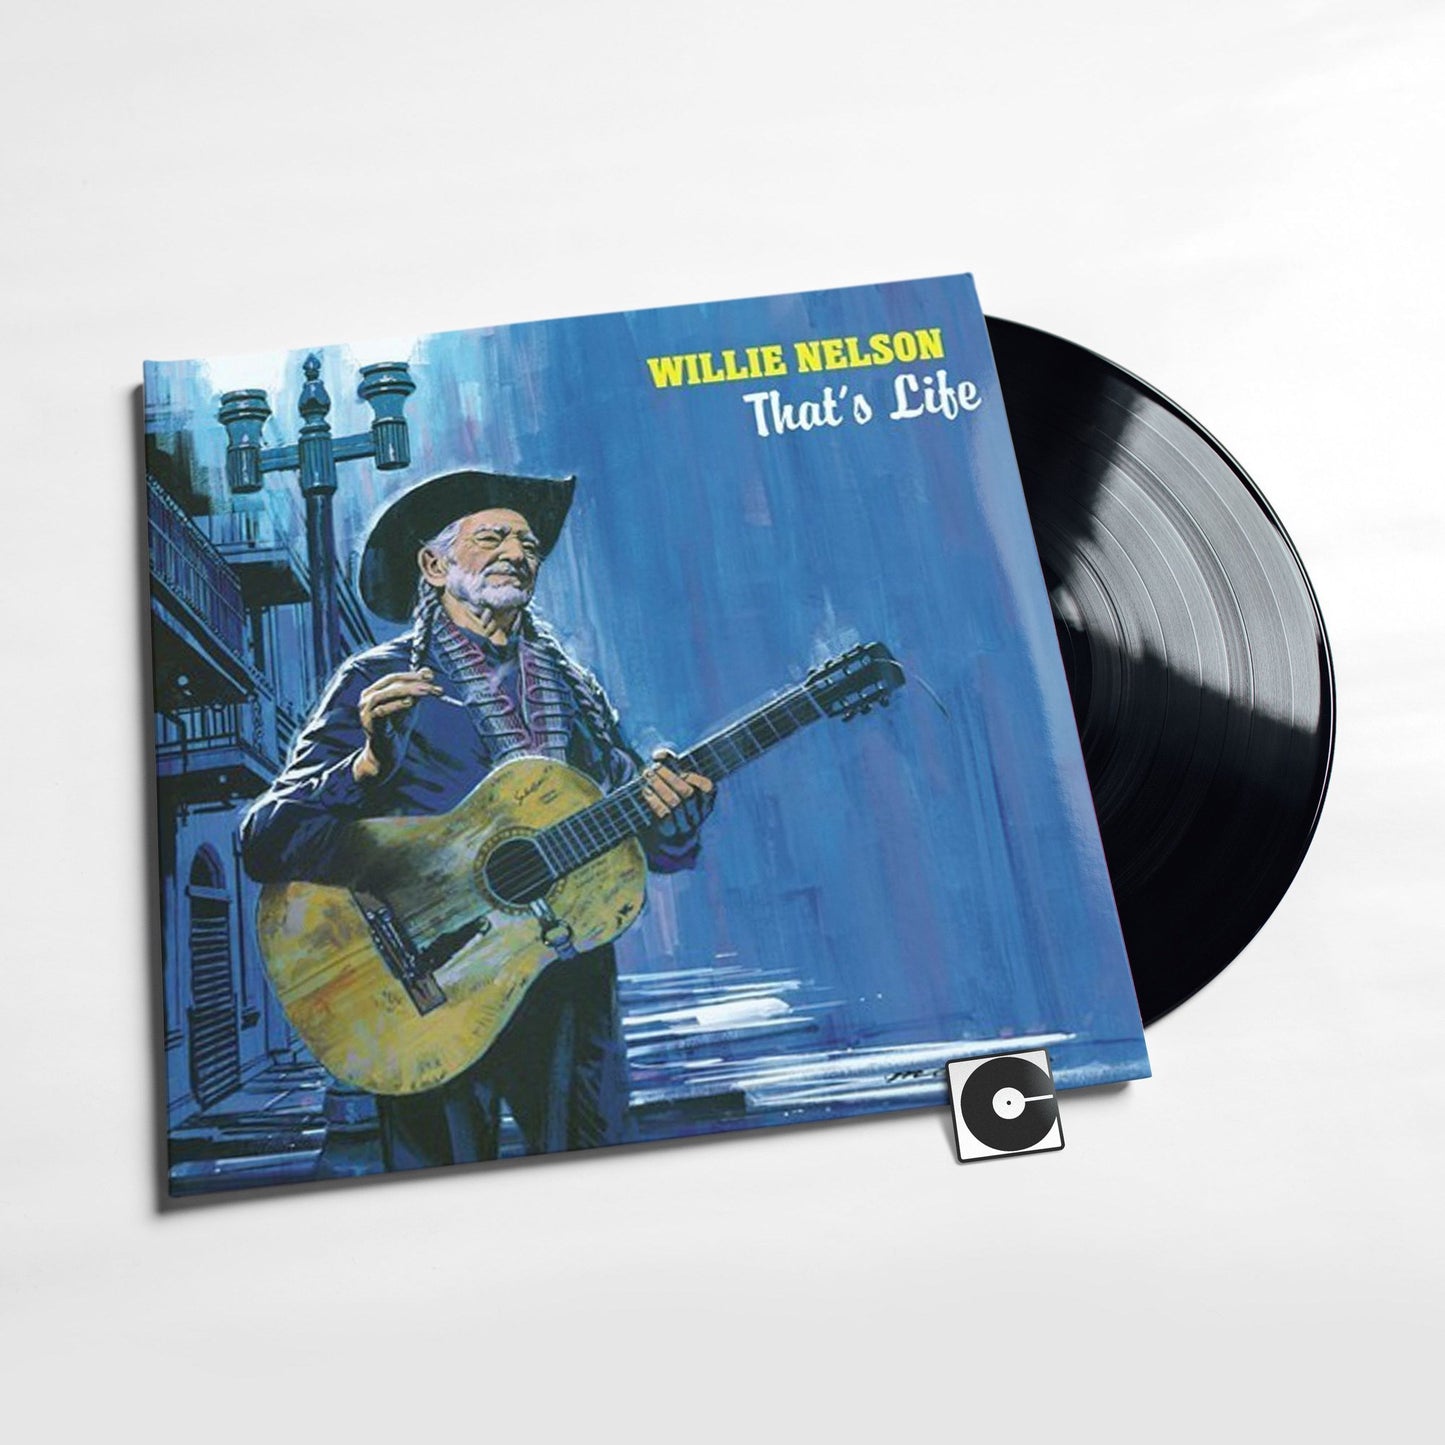 Willie Nelson - "That's Life"